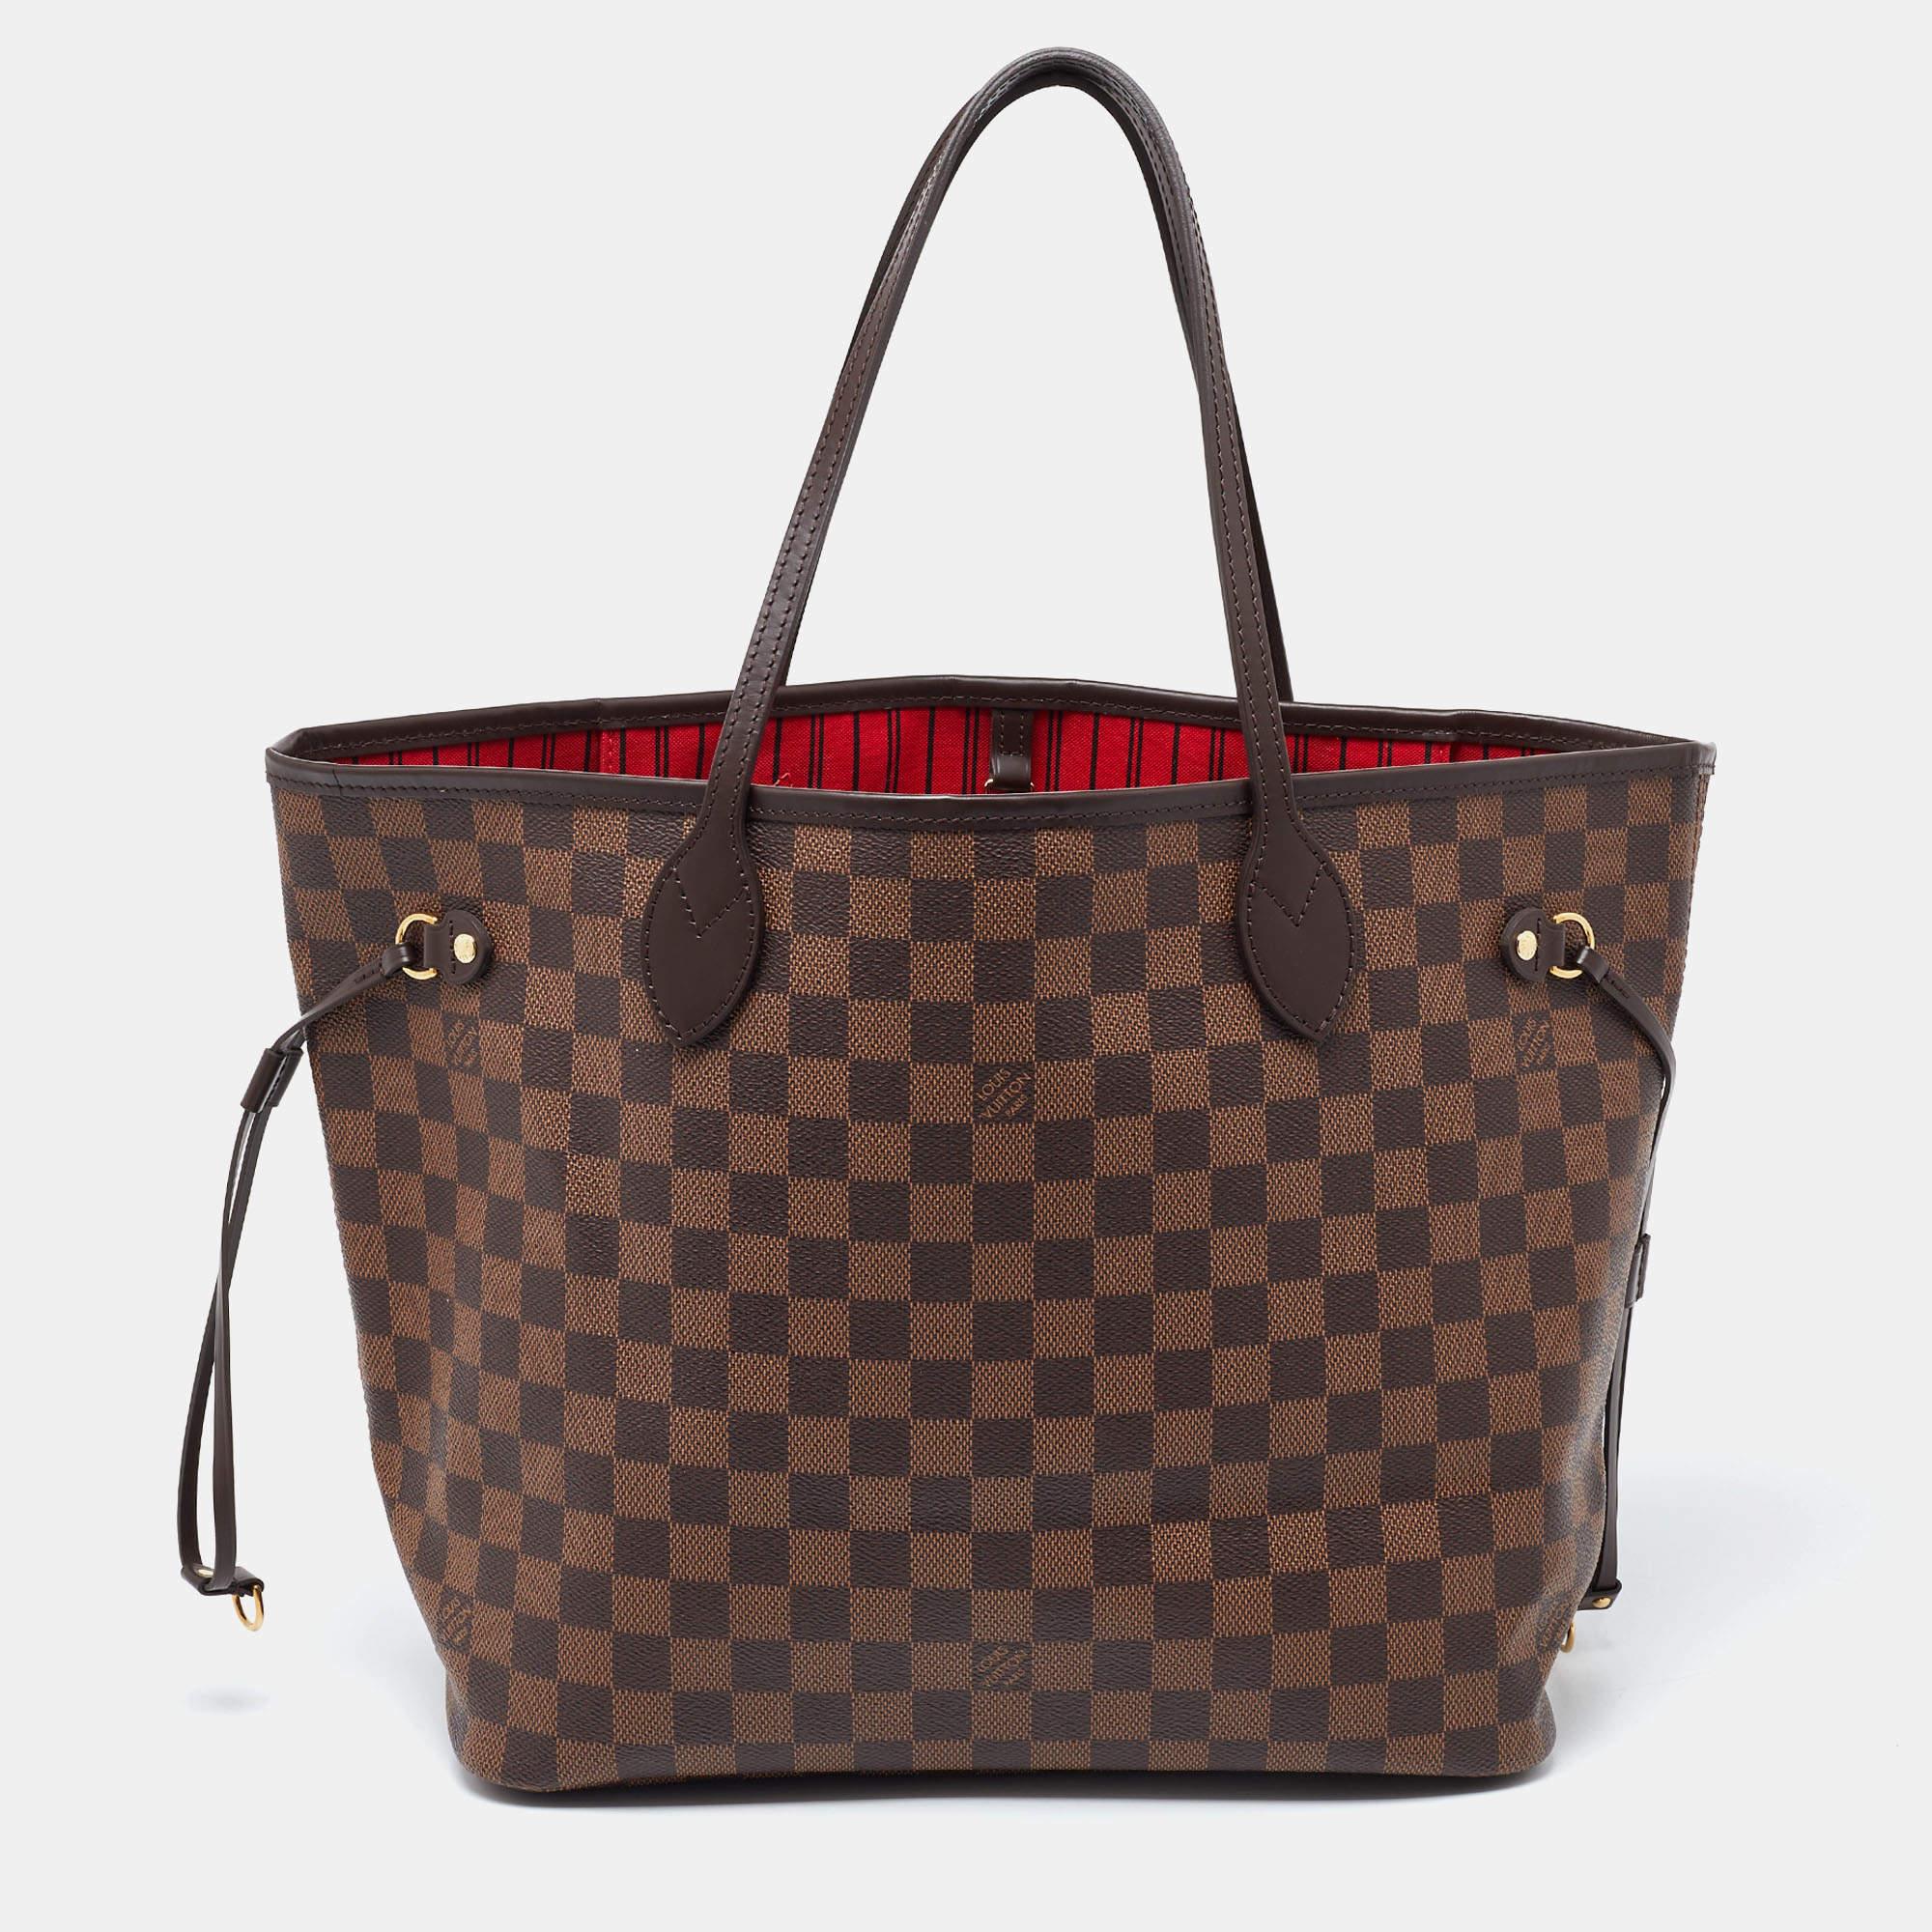 Louis Vuitton’s Neverfull was first introduced in 2007, and even today, it is a popular design. Crafted from Damier Ebene canvas and leather, this Neverfull is gorgeous. The bag has drawstrings on the sides, a spacious canvas interior that can house